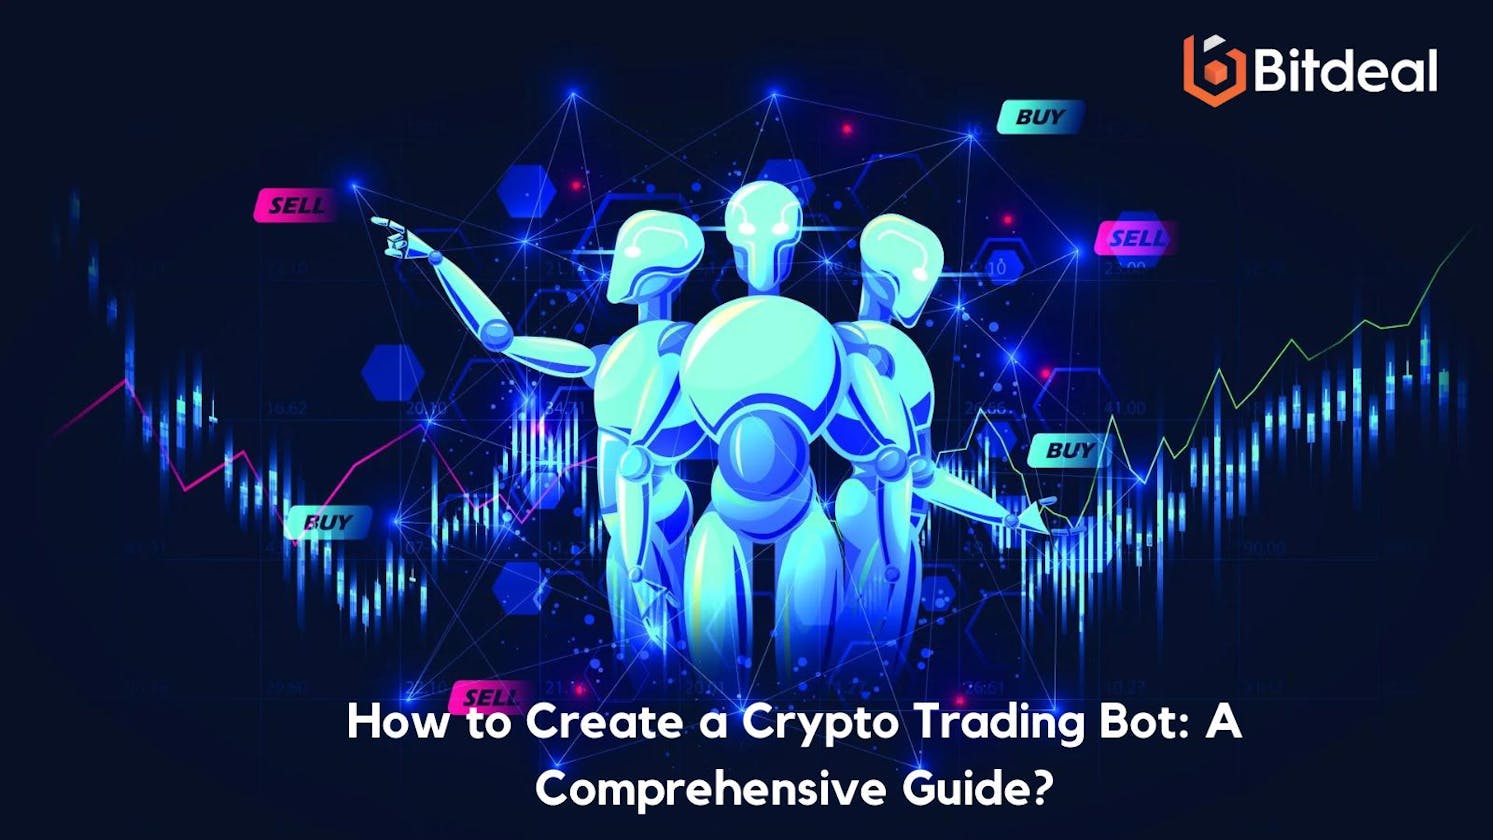 How to Create a Crypto Trading Bot: A Comprehensive Guide?